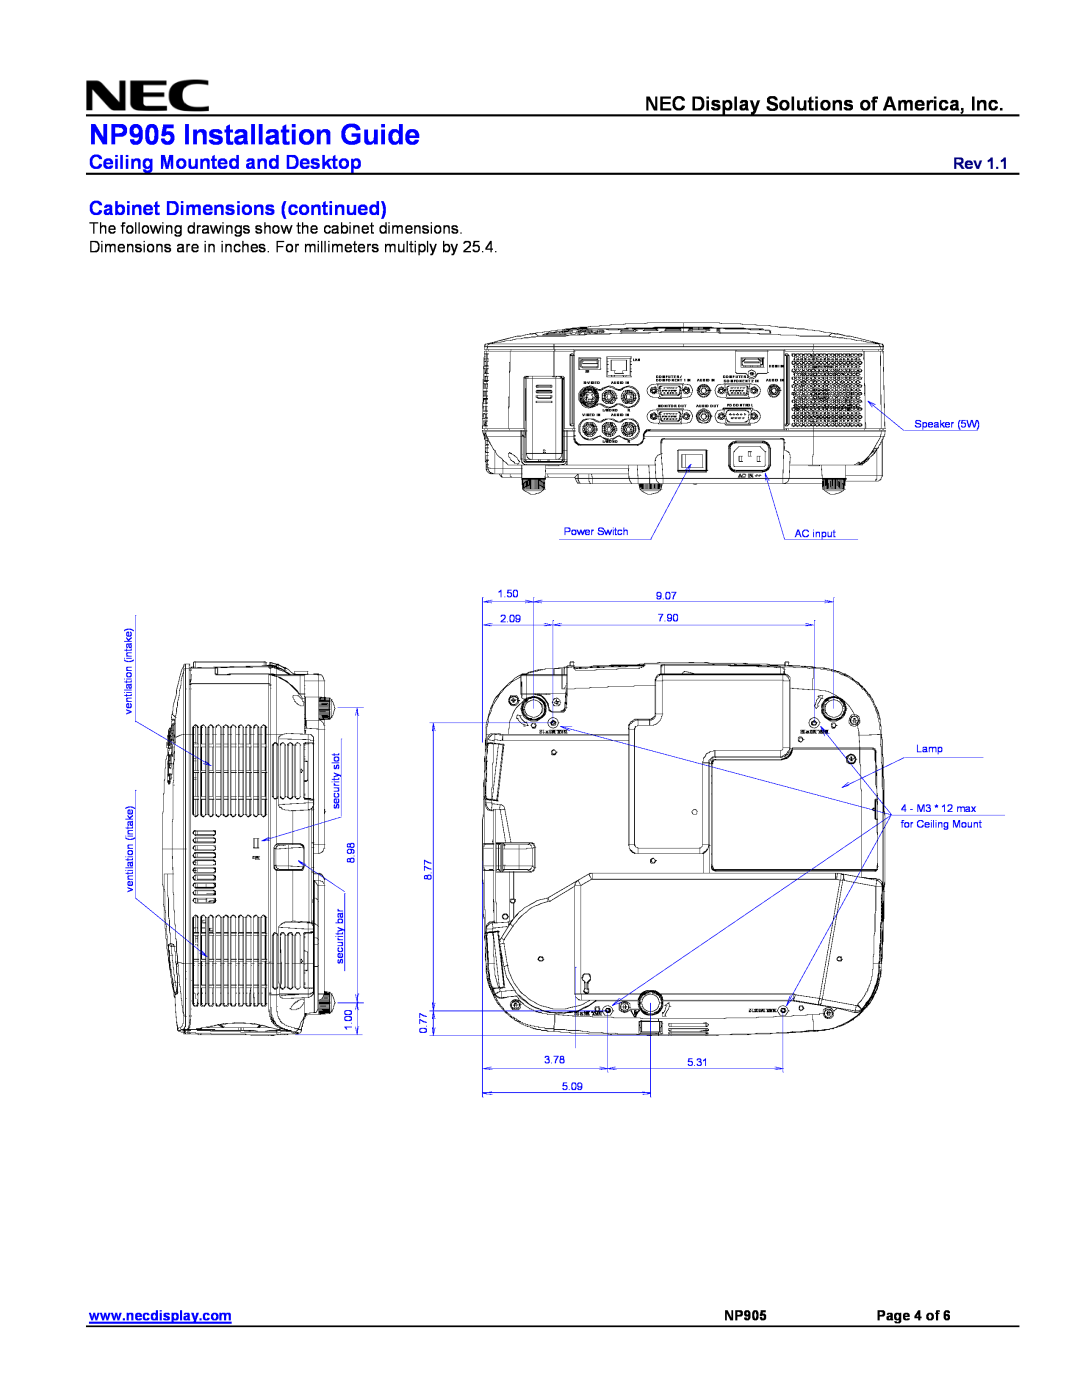 NEC Cabinet Dimensions continued, NP905 Installation Guide, NEC Display Solutions of America, Inc, Page 4 of 